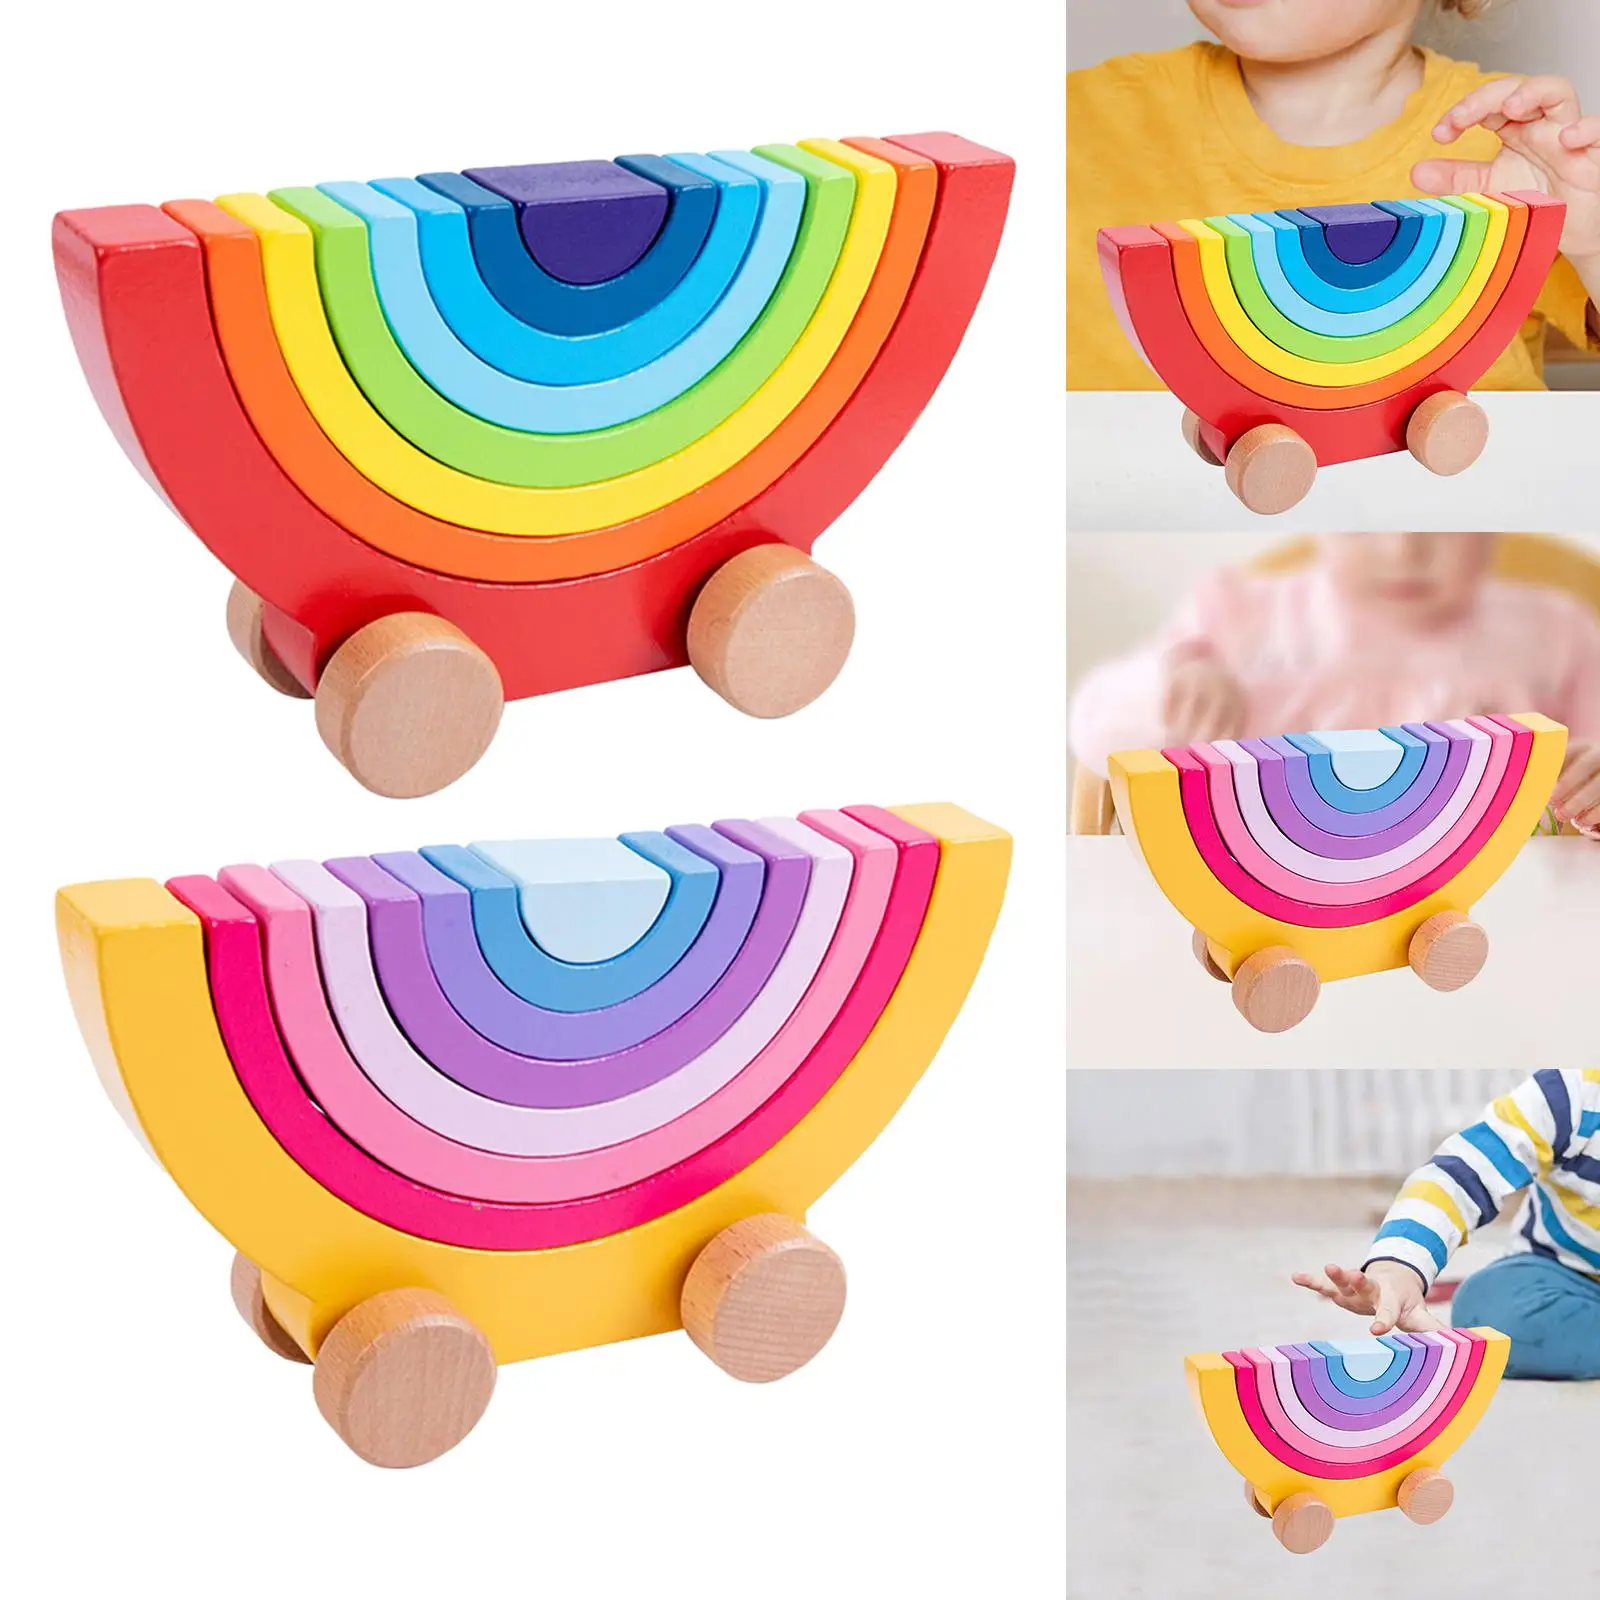 Wooden Building Blocks Car Toy Stackable Colorful Creative Arch for Kids Teaching